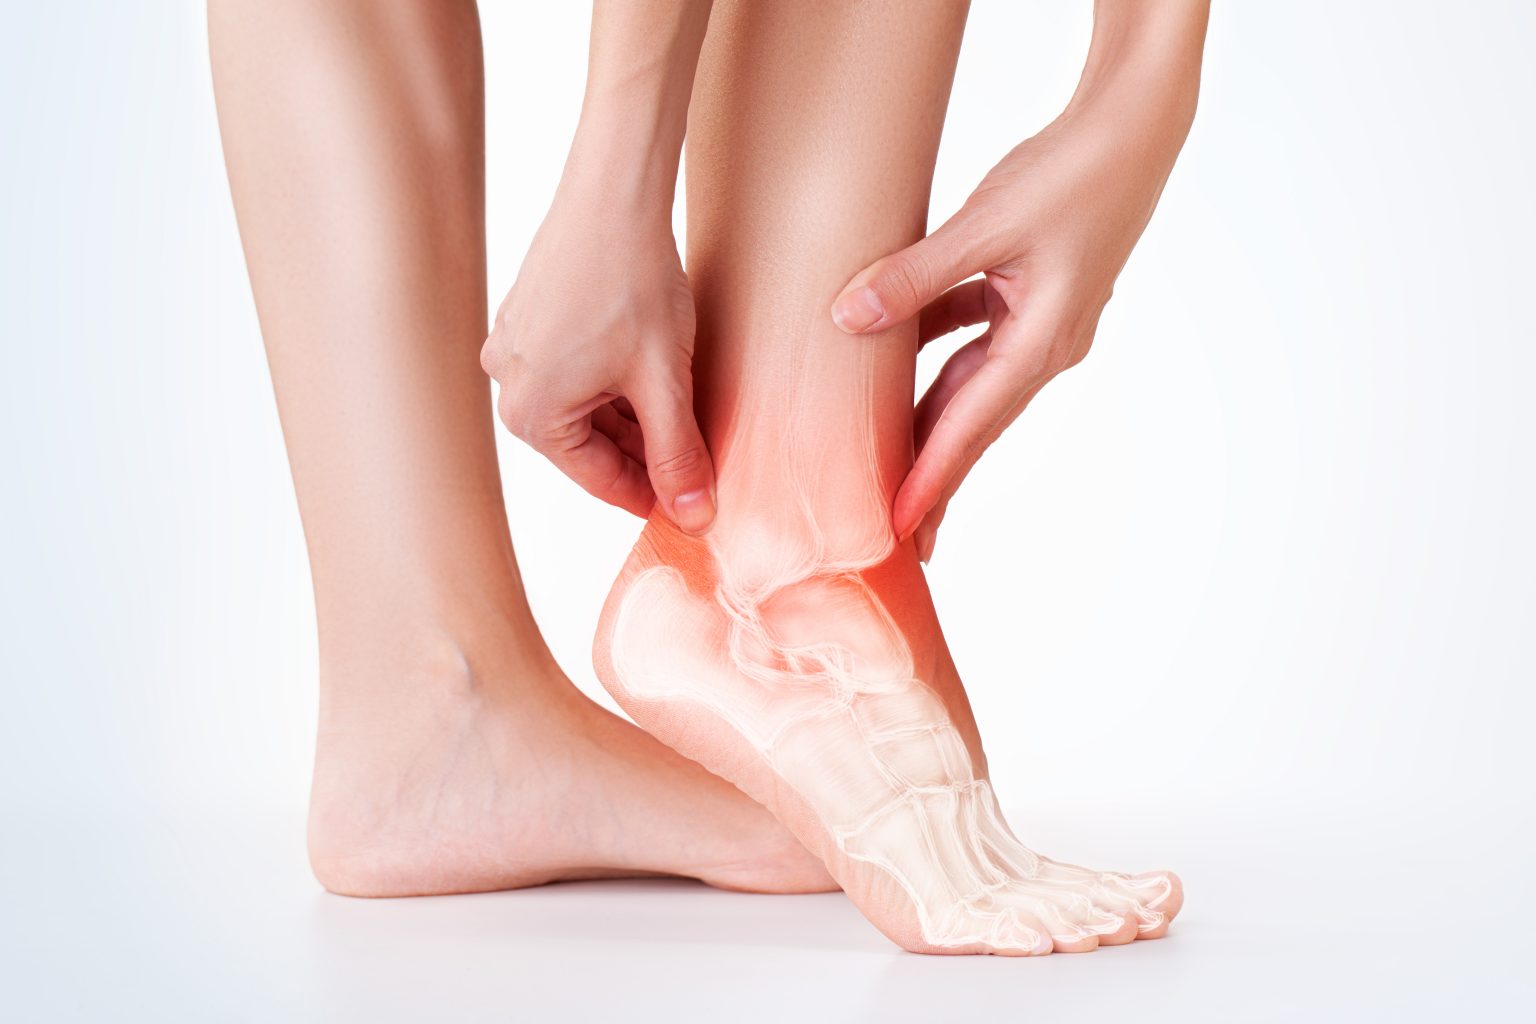 6-causes-of-ankle-pain-not-related-to-injury-foot-and-ankle-group